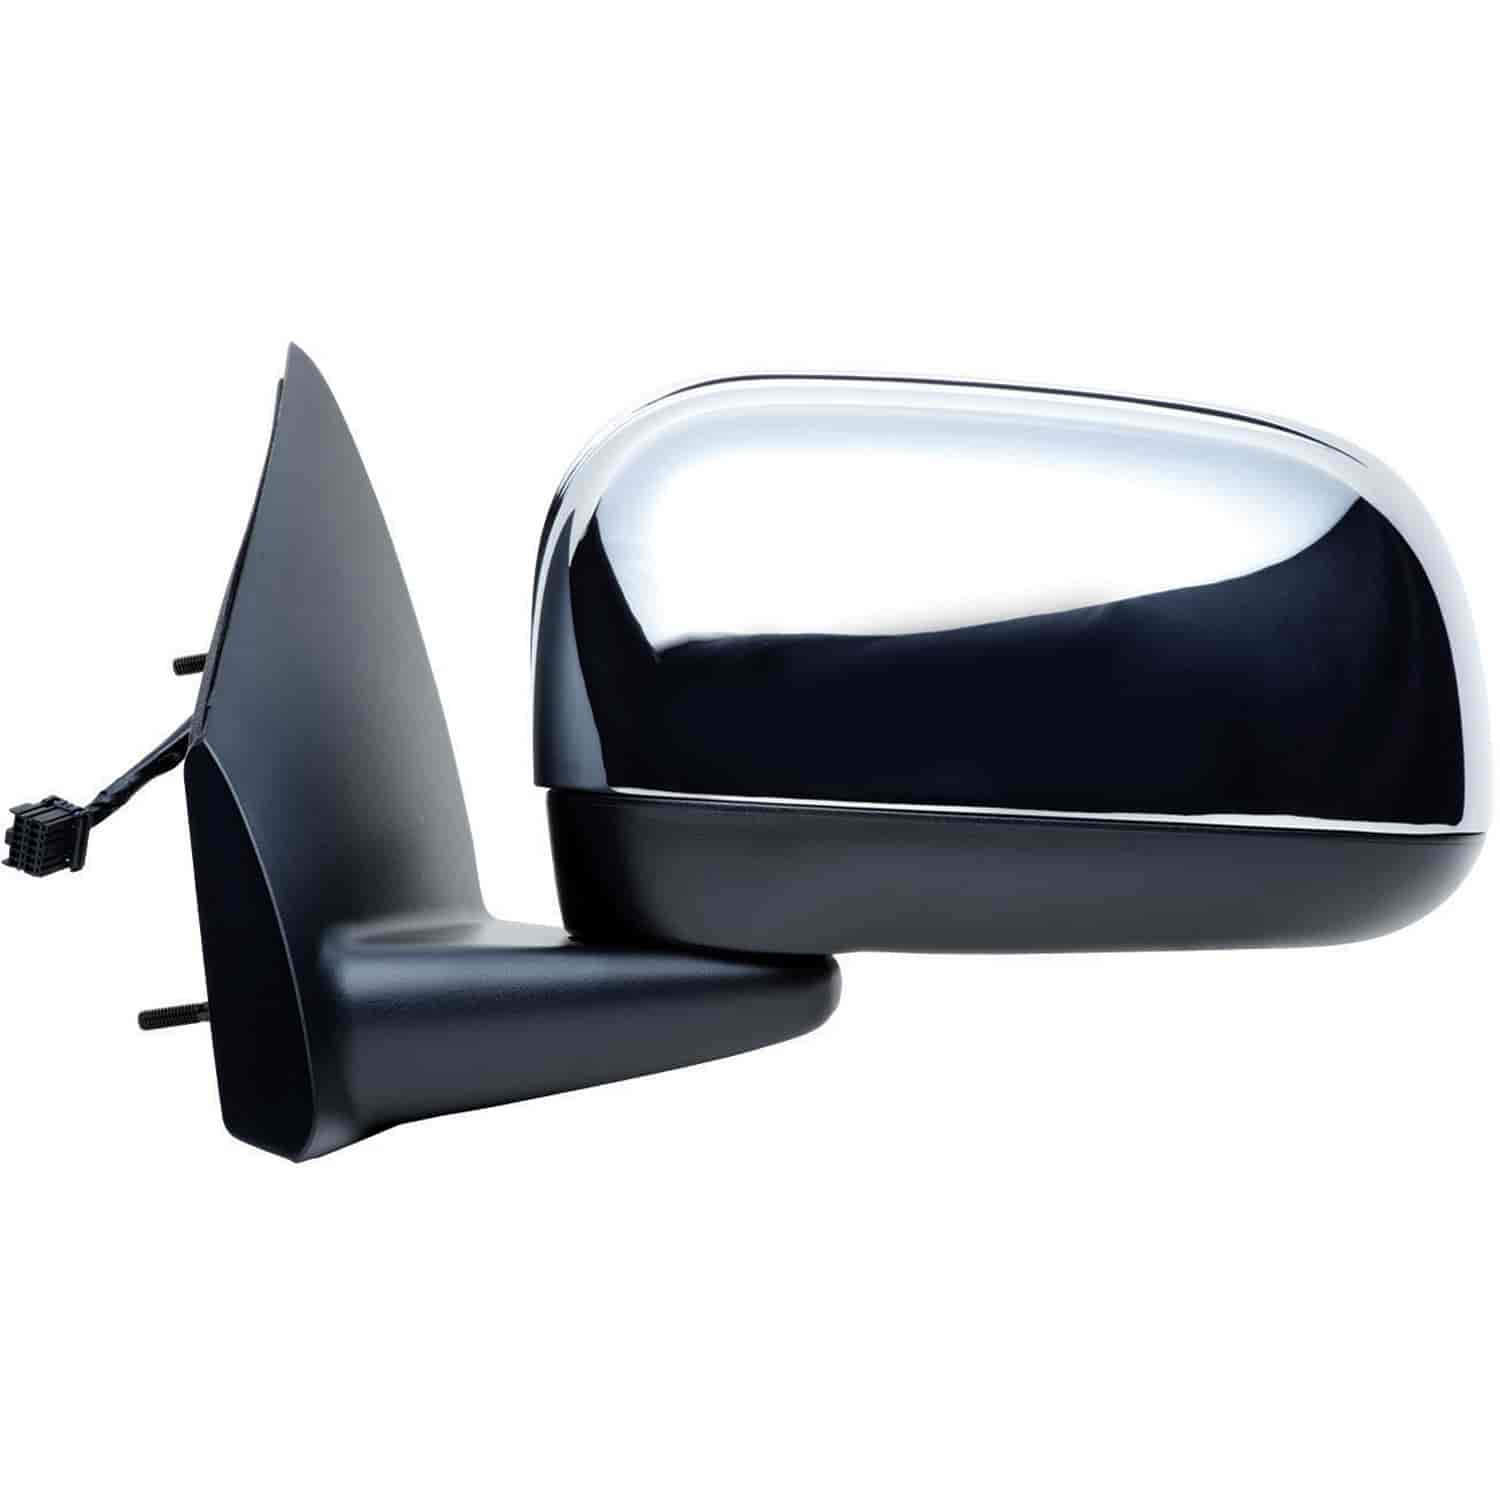 OEM Style Replacement mirror for 07-09 Chrysler Aspen GTS code driver side mirror tested to fit and